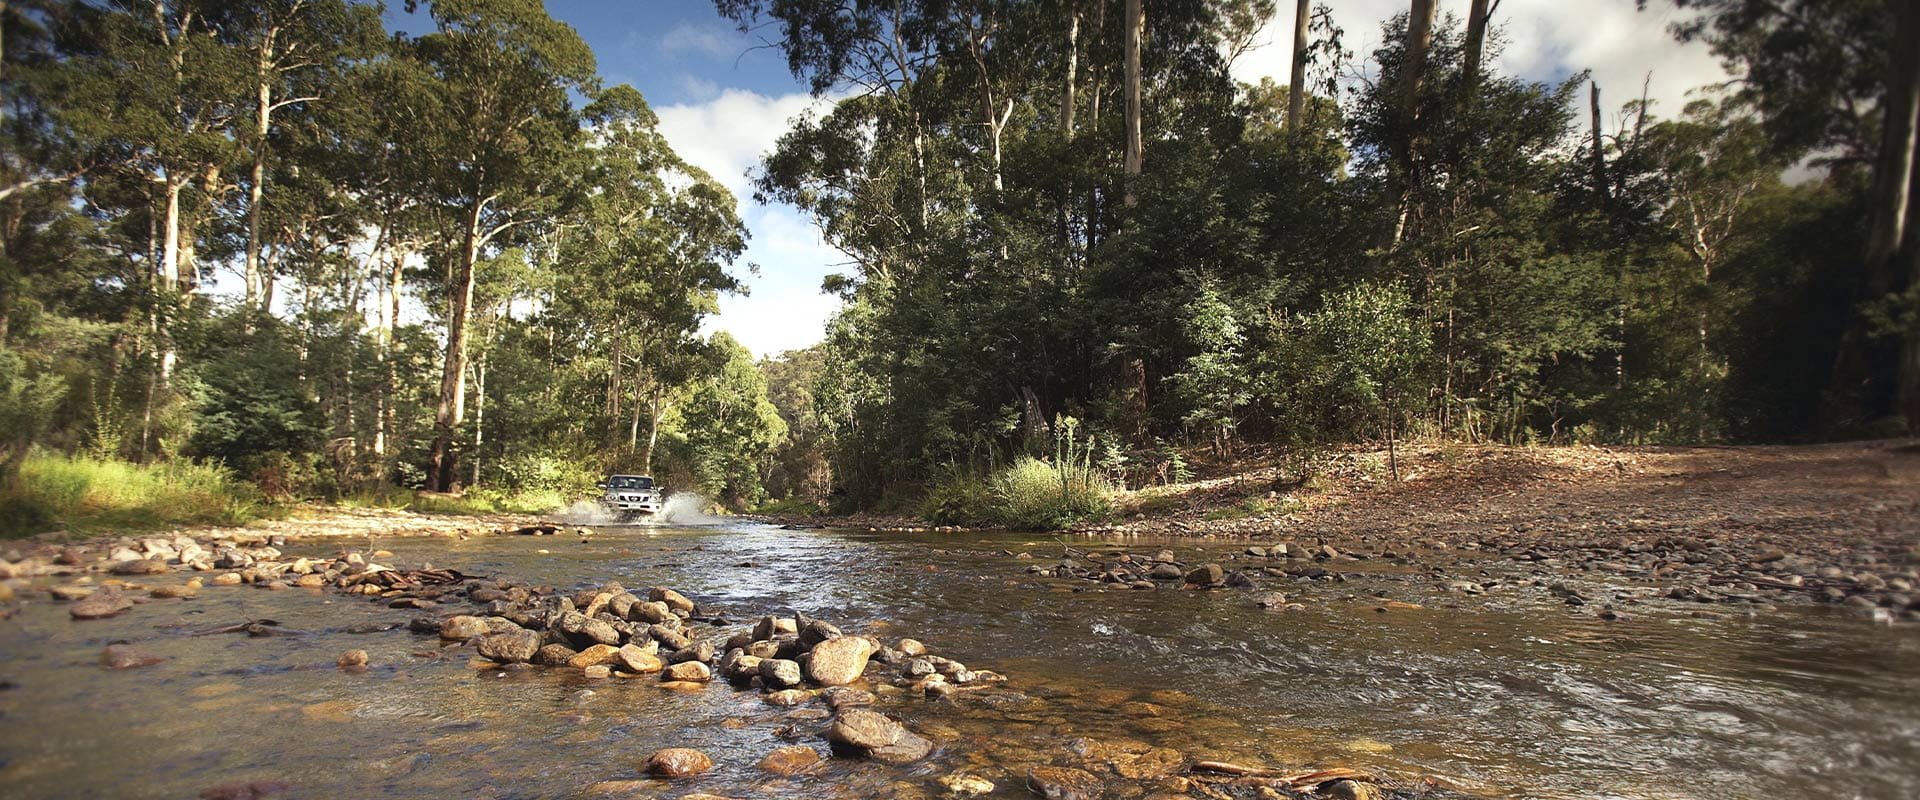 A silver 4WD crosses a shallow river, lined will small round rocks infront of backdrop of gum trees